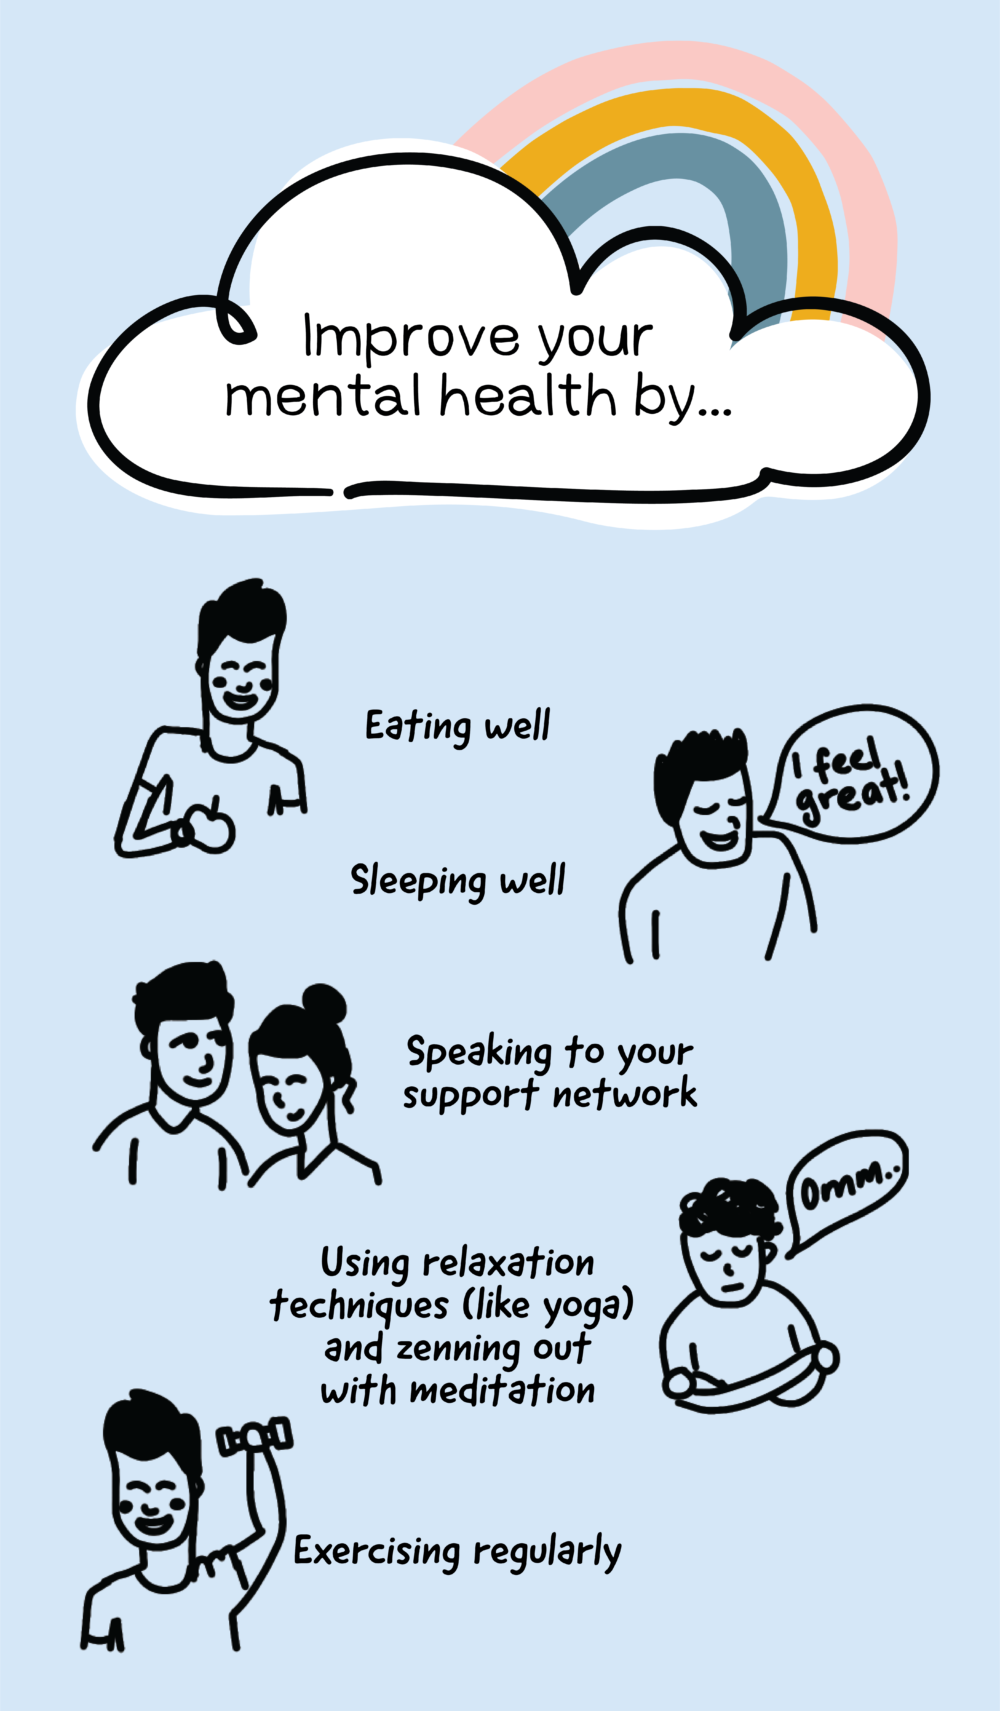 Improve your mental health